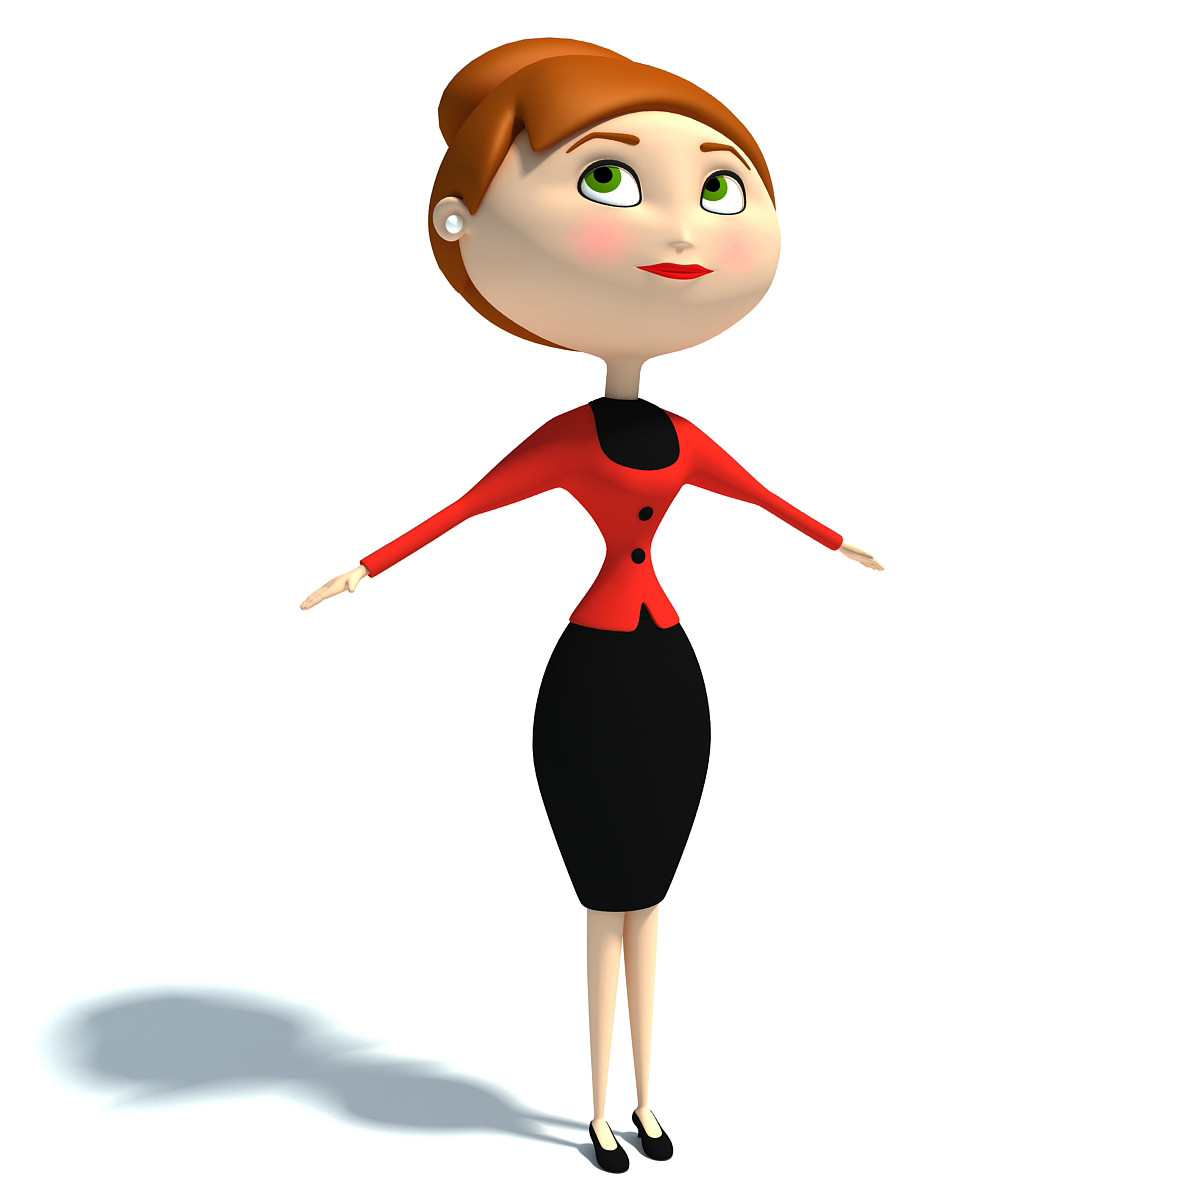 Searched 3d models for Rigged Cartoon Woman with Glasses